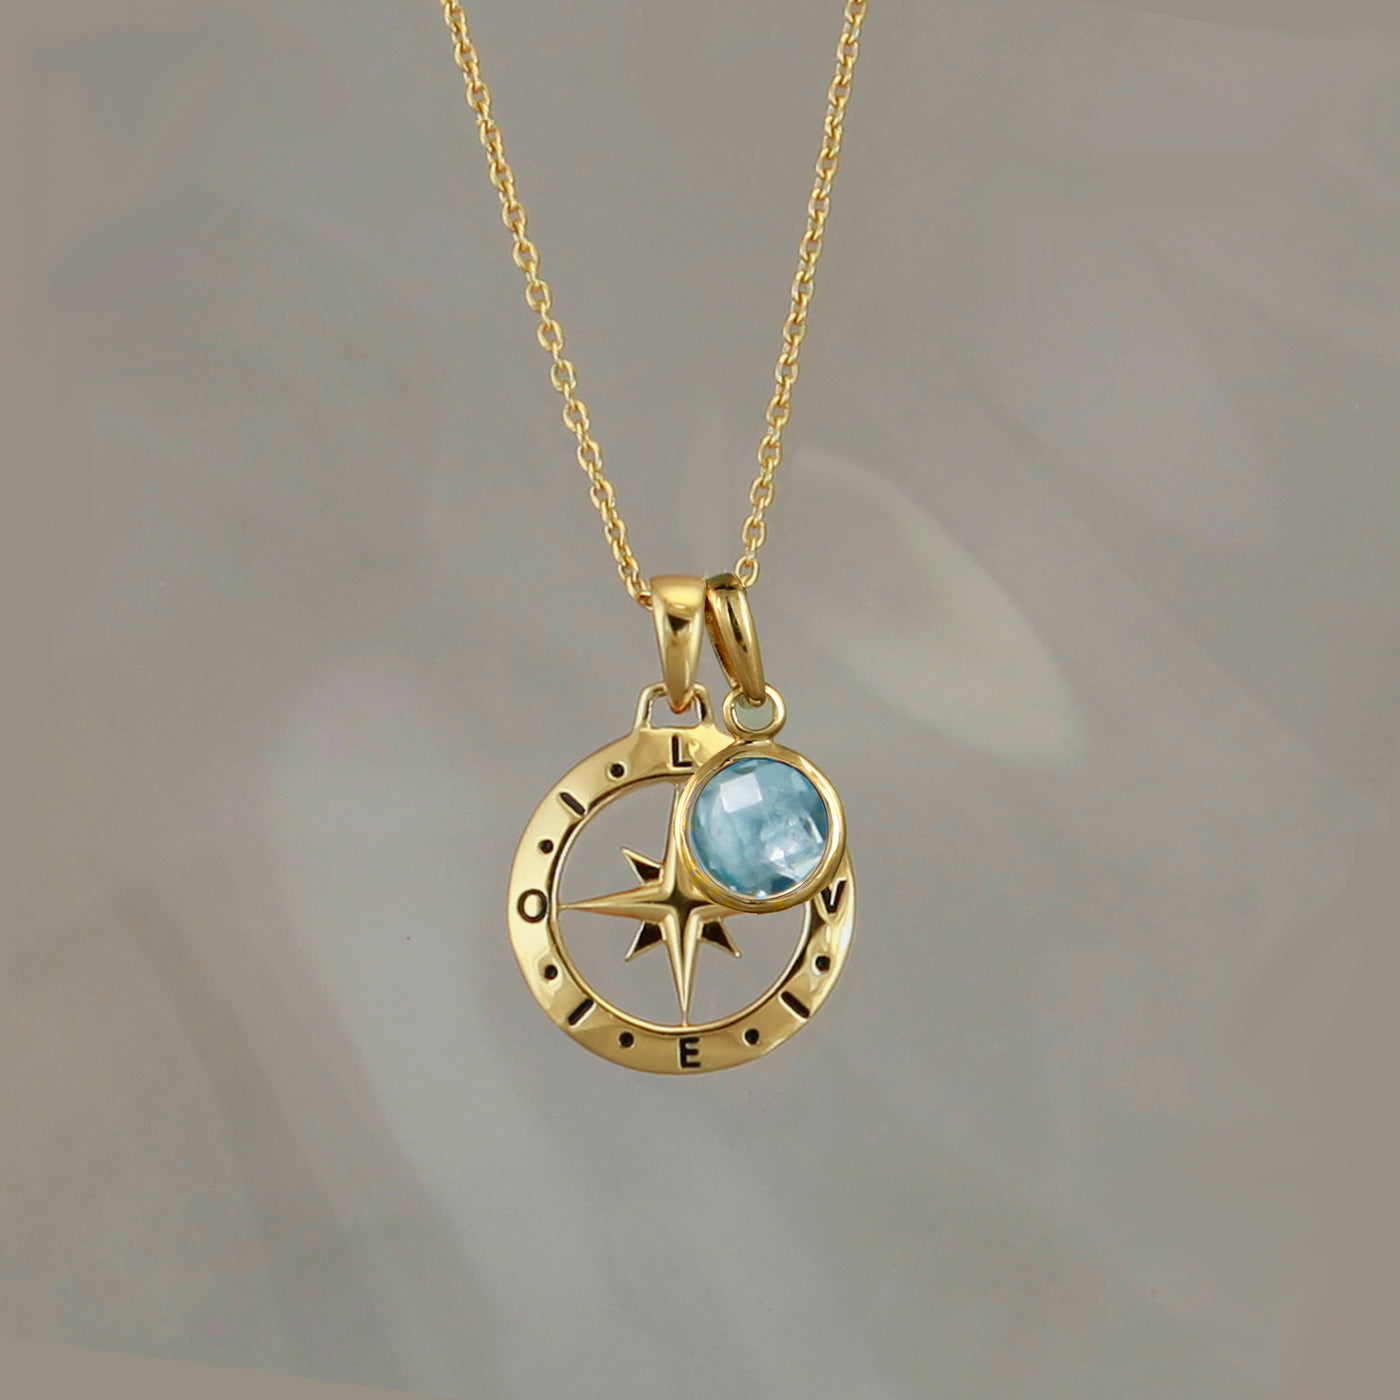 Compass Necklace in Gold with Birthstone